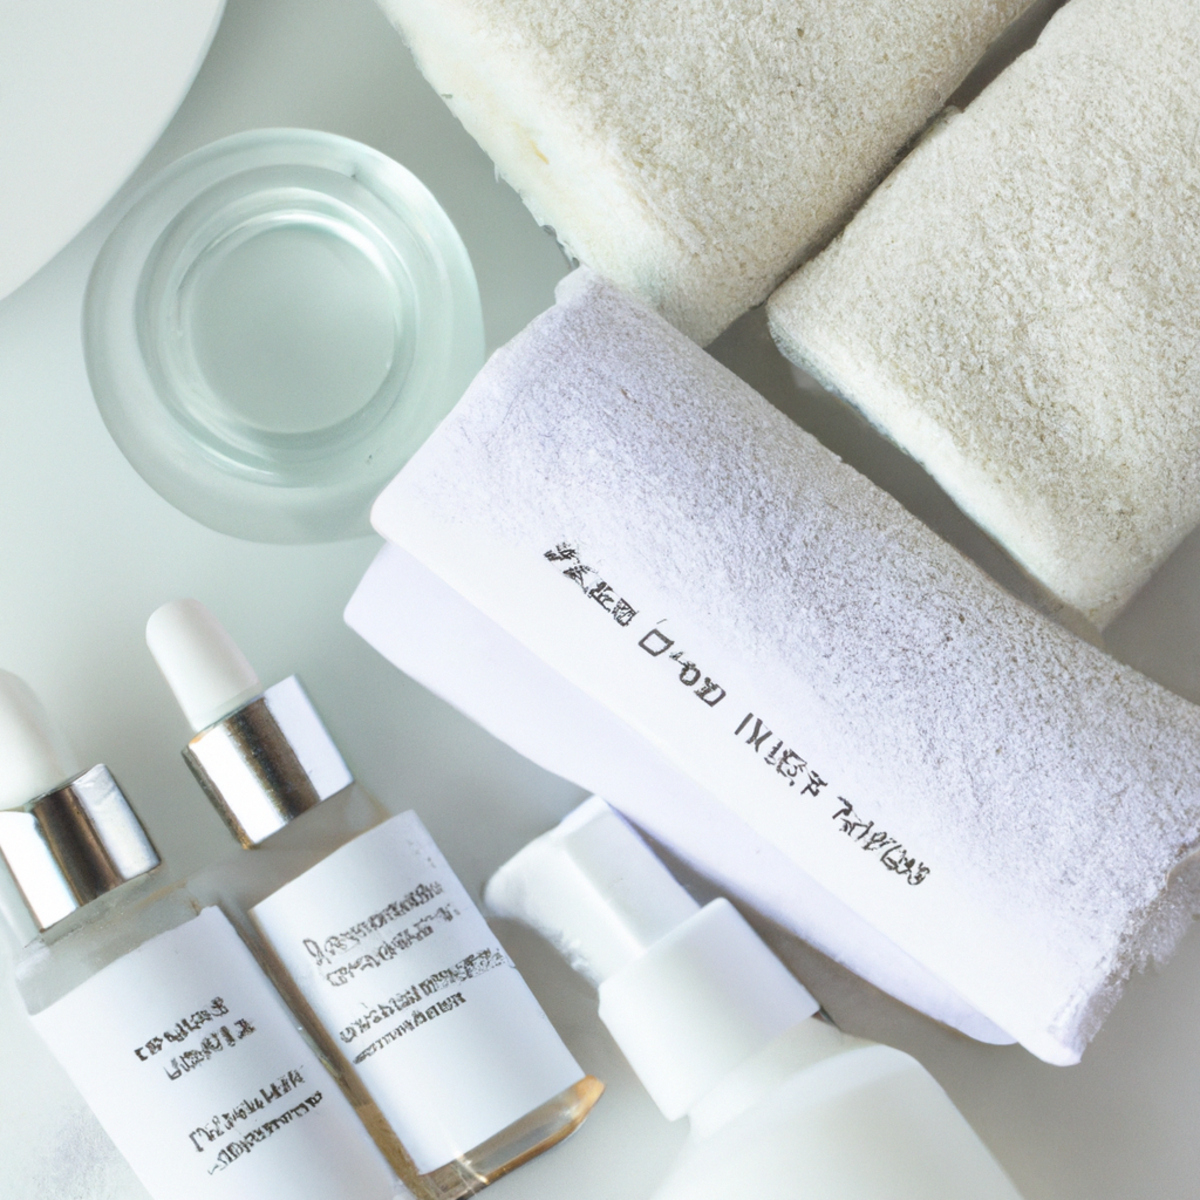 Transform your bathroom into a spa oasis with these natural skin care routines. Indulge in a gentle cleanse, a soothing toner, a hydrating serum, and a calming moisturizer - all specially formulated for sensitive skin. Trust us, your skin will thank you for this luxurious self-care ritual.